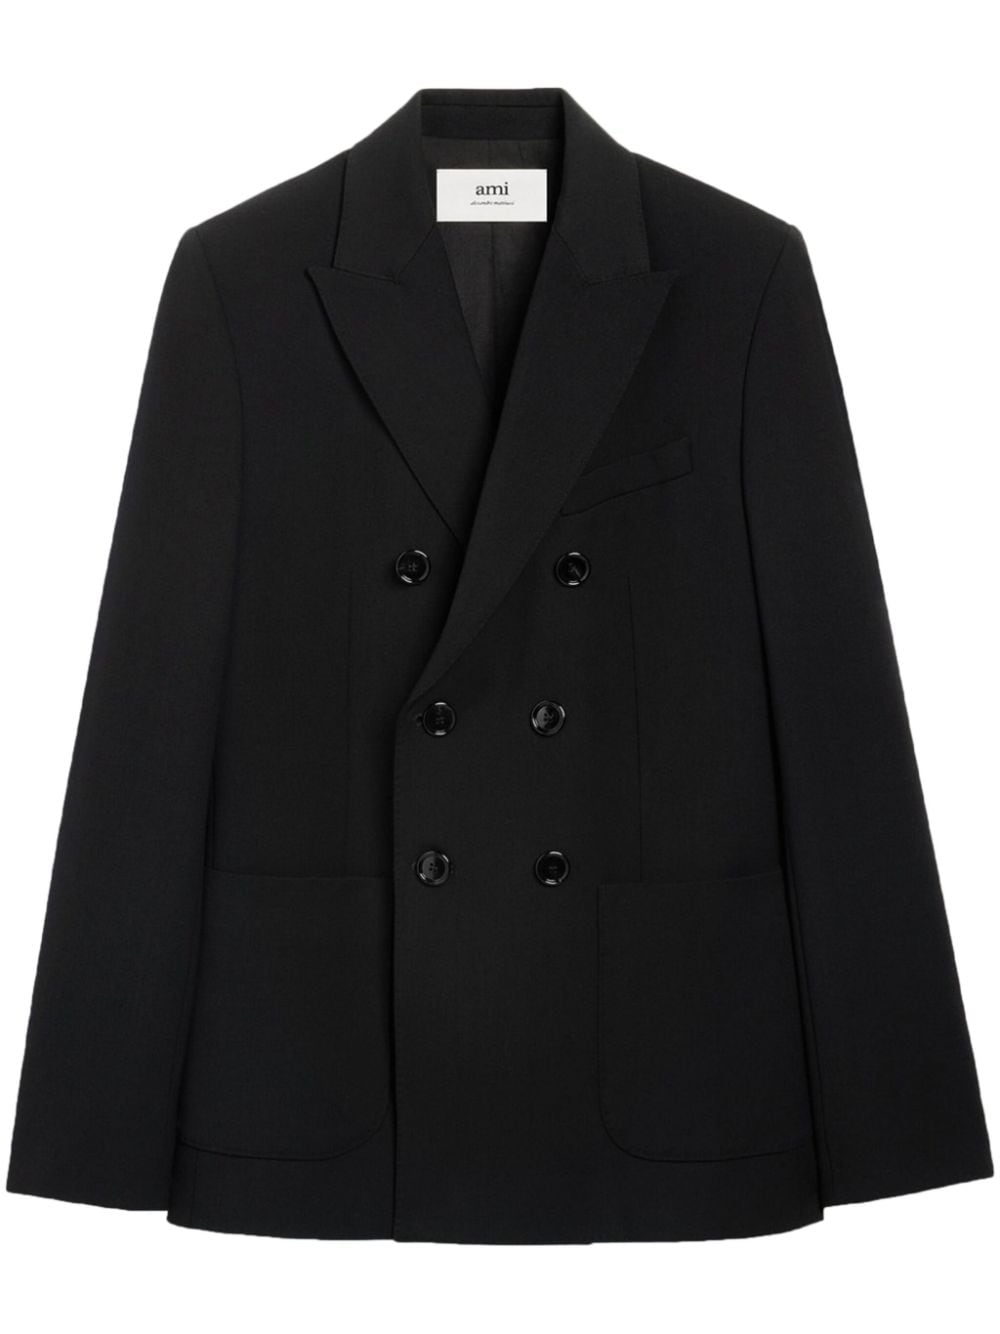 Ami Alexandre Mattiussi Stylish And Sophisticated Women's American-inspired Black Coat For The Ss24 Season